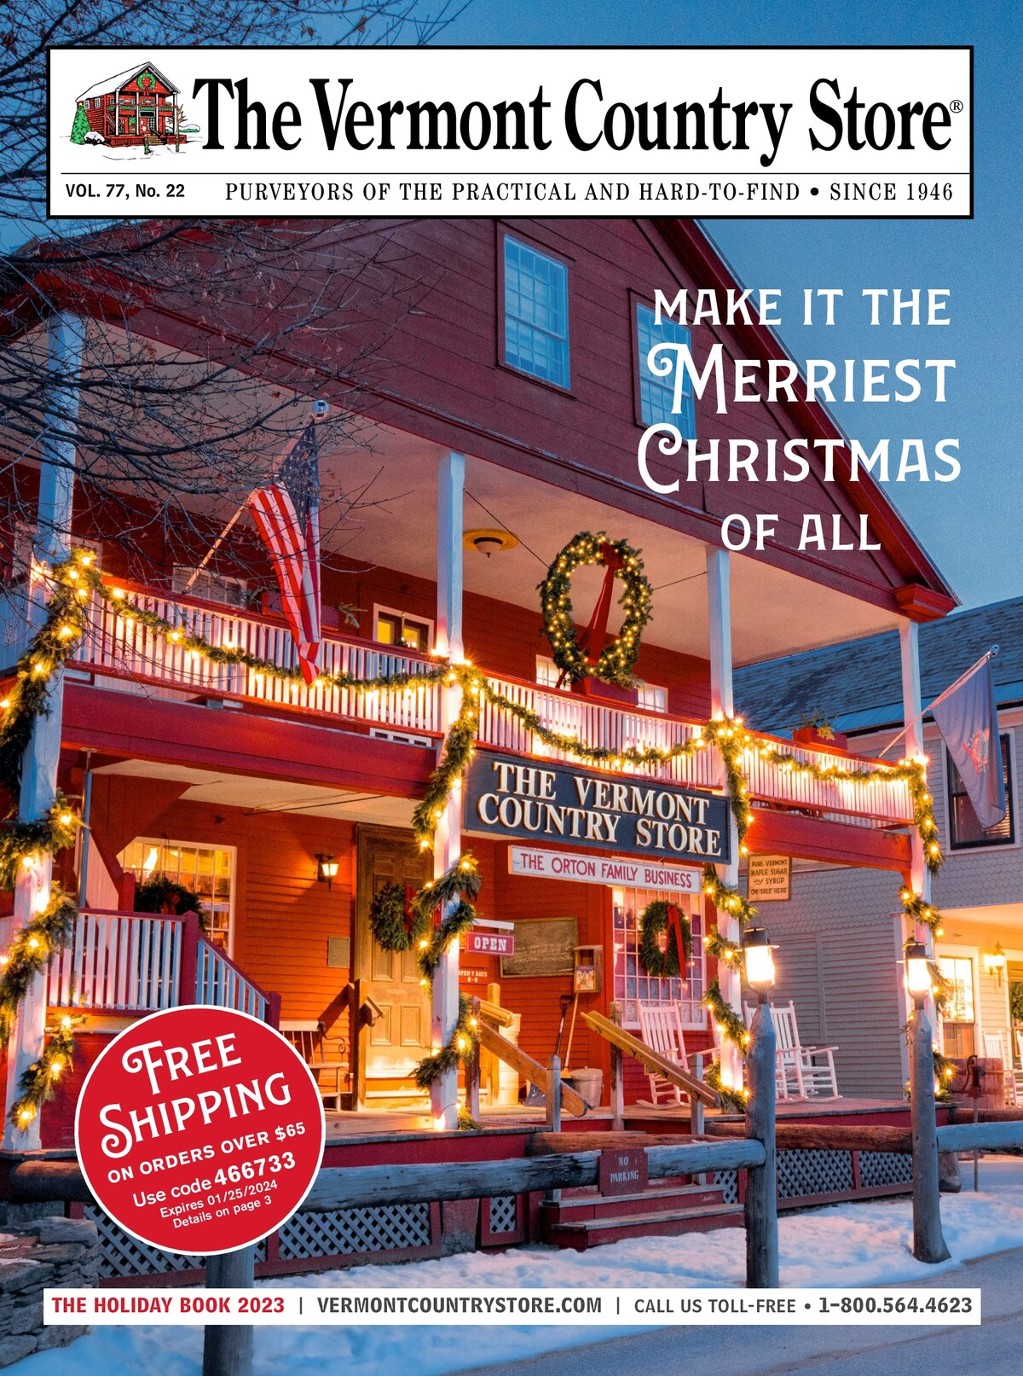 The Vermont Country Store Catalog Online